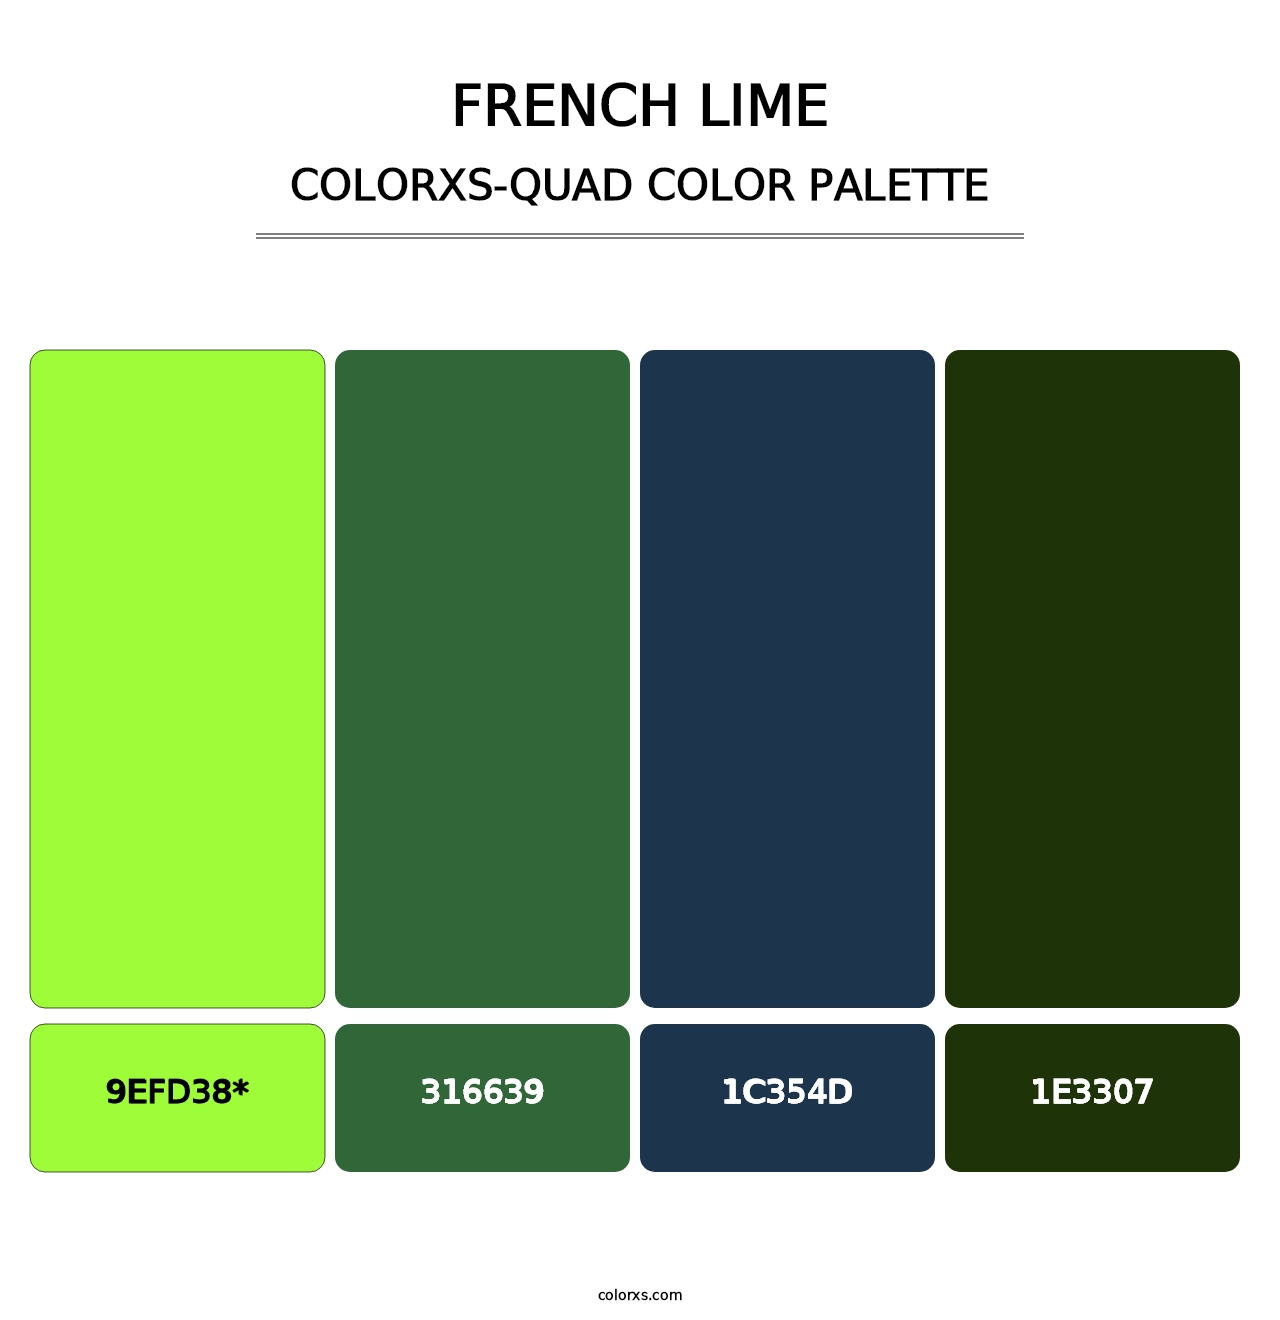 French Lime - Colorxs Quad Palette